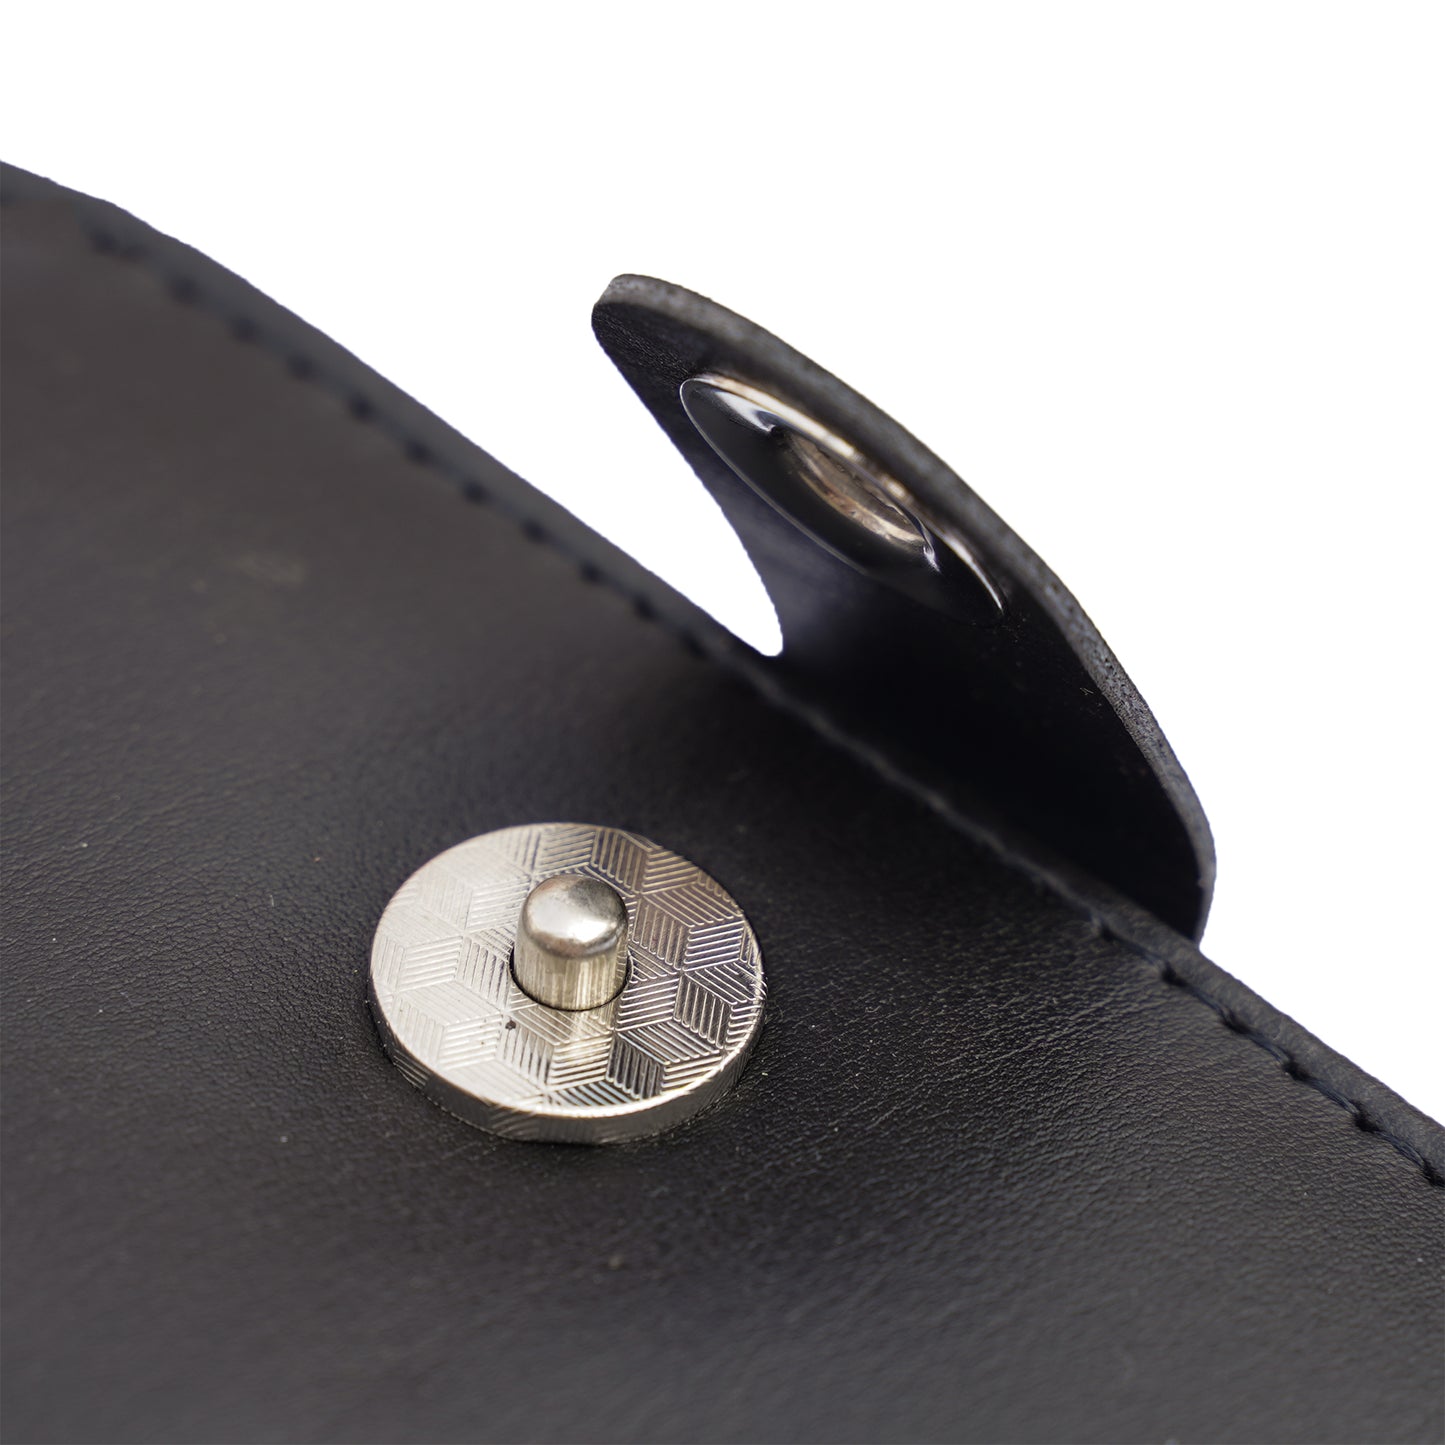 Compact Charm: Magnetic Button Wallet